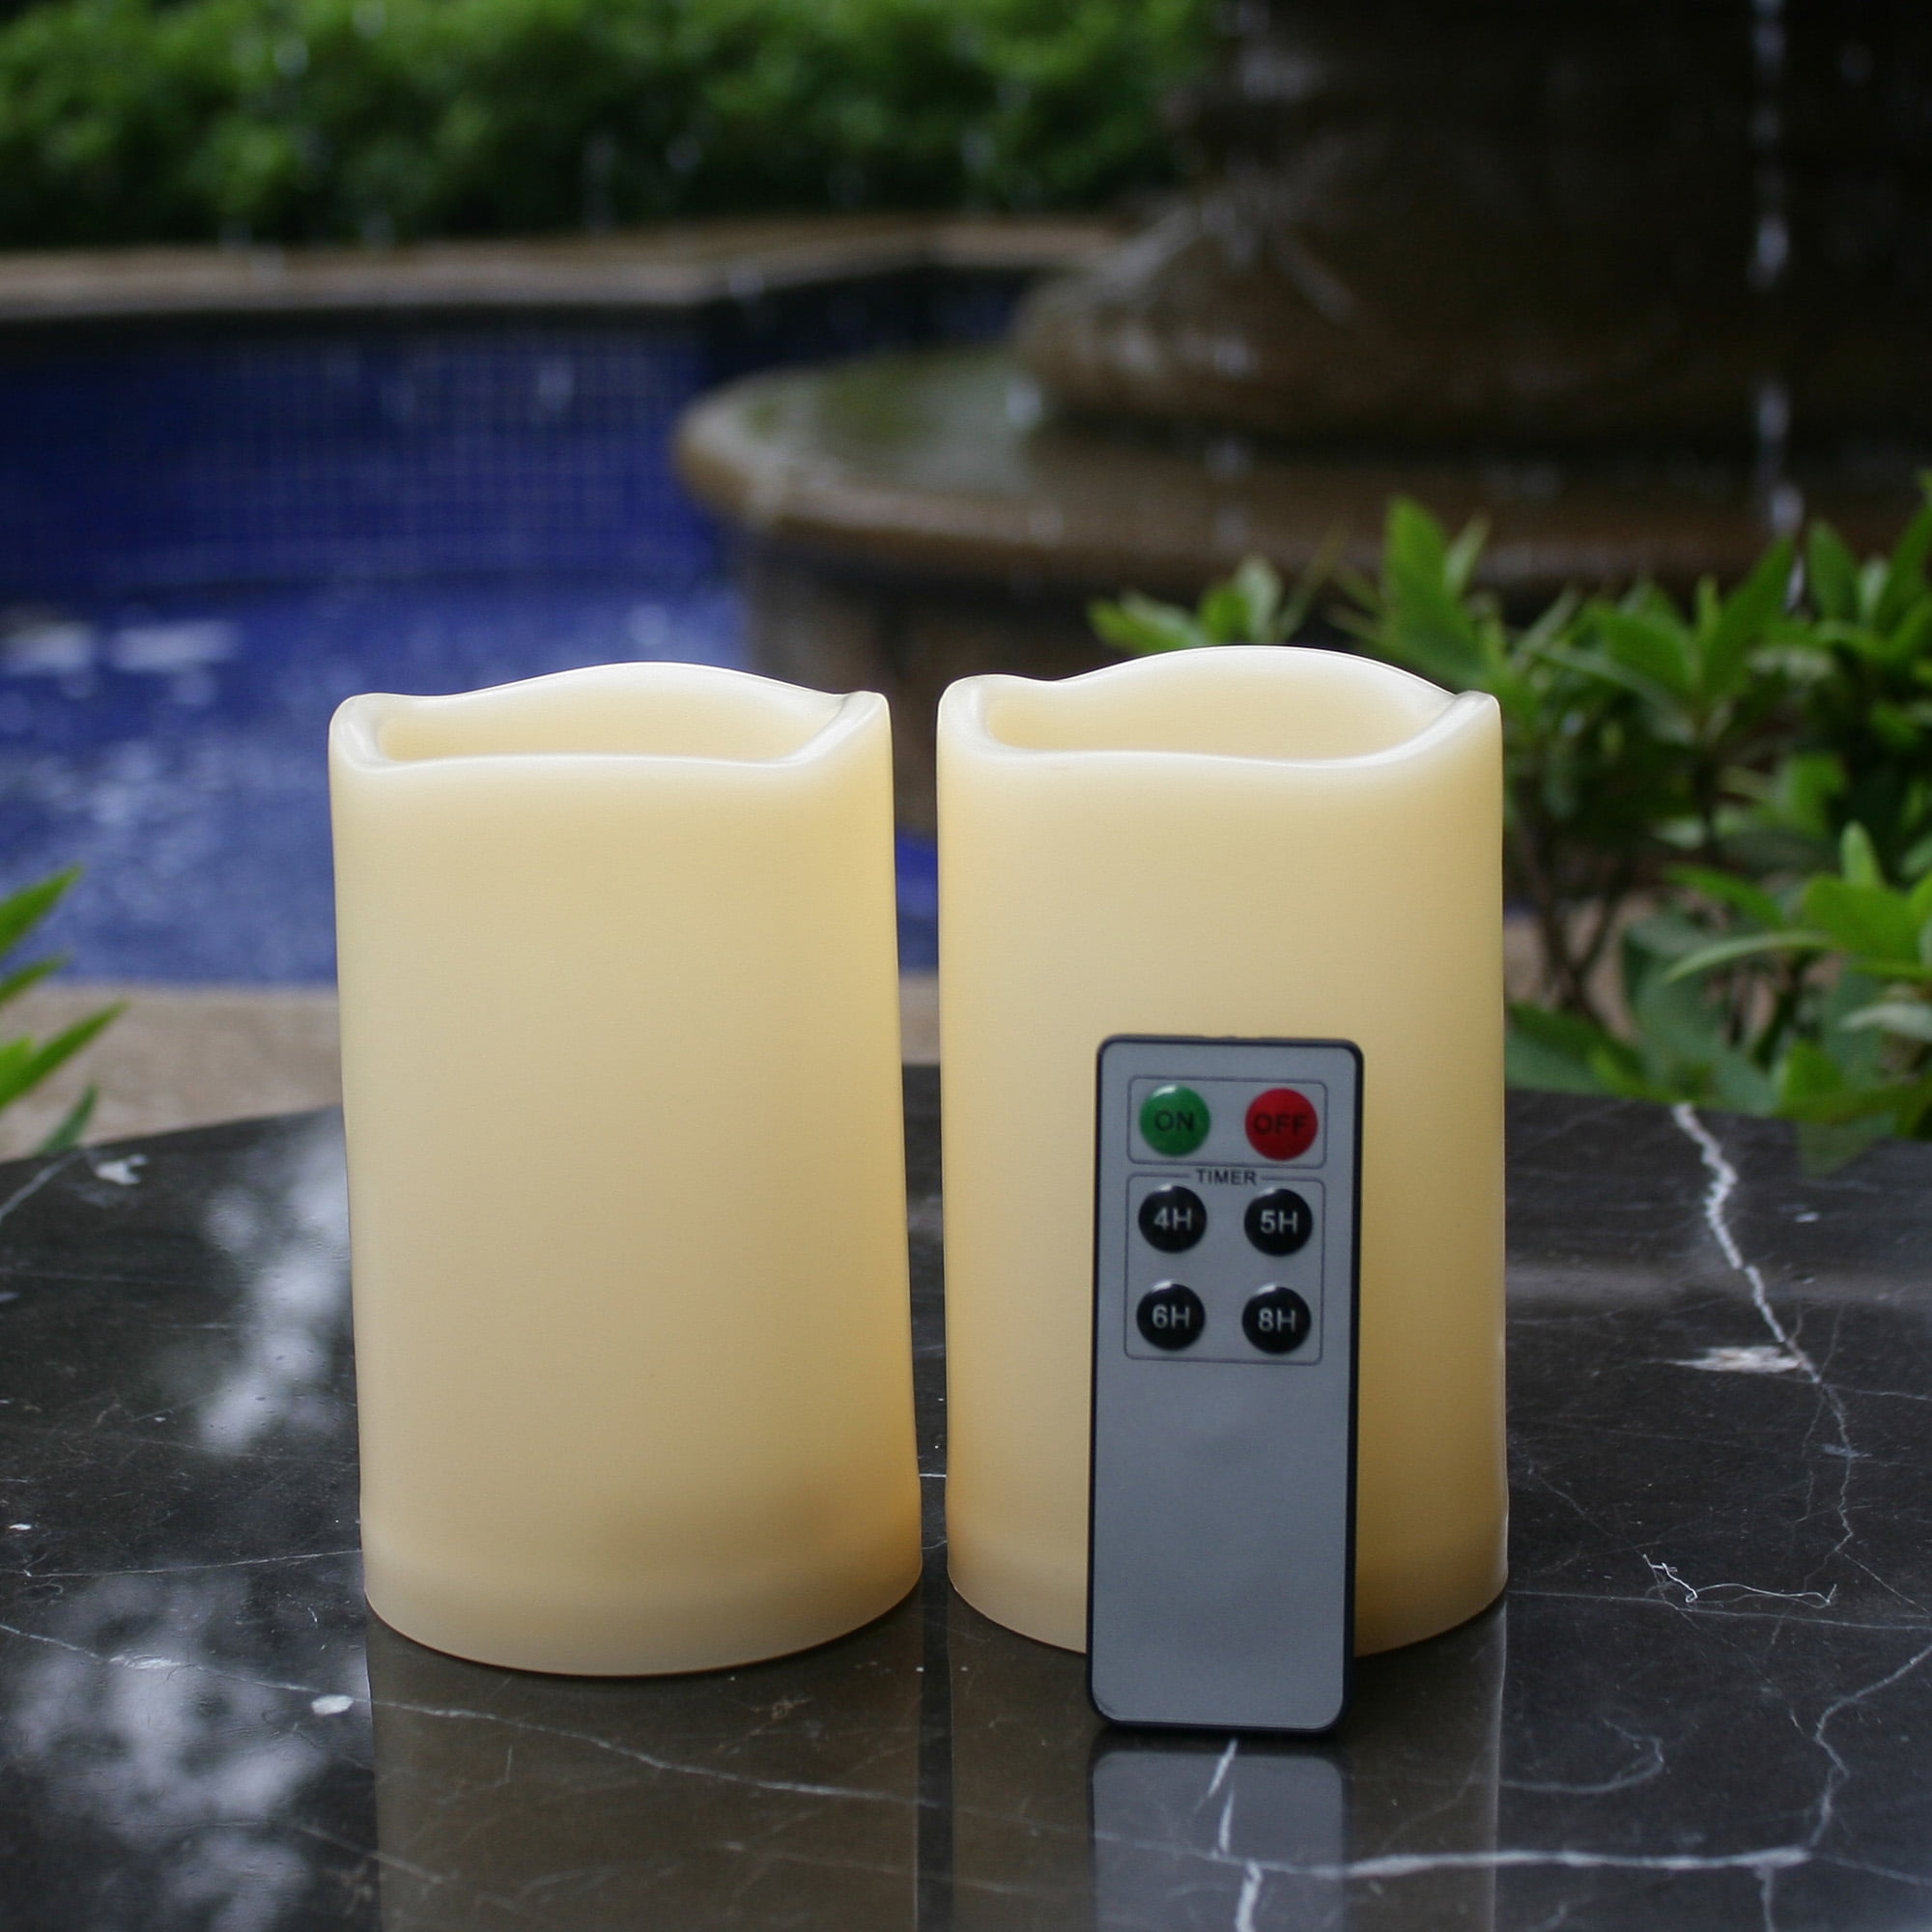 Flameless Candles Battery Operated Pillar LED Set with Remote Control Timer 